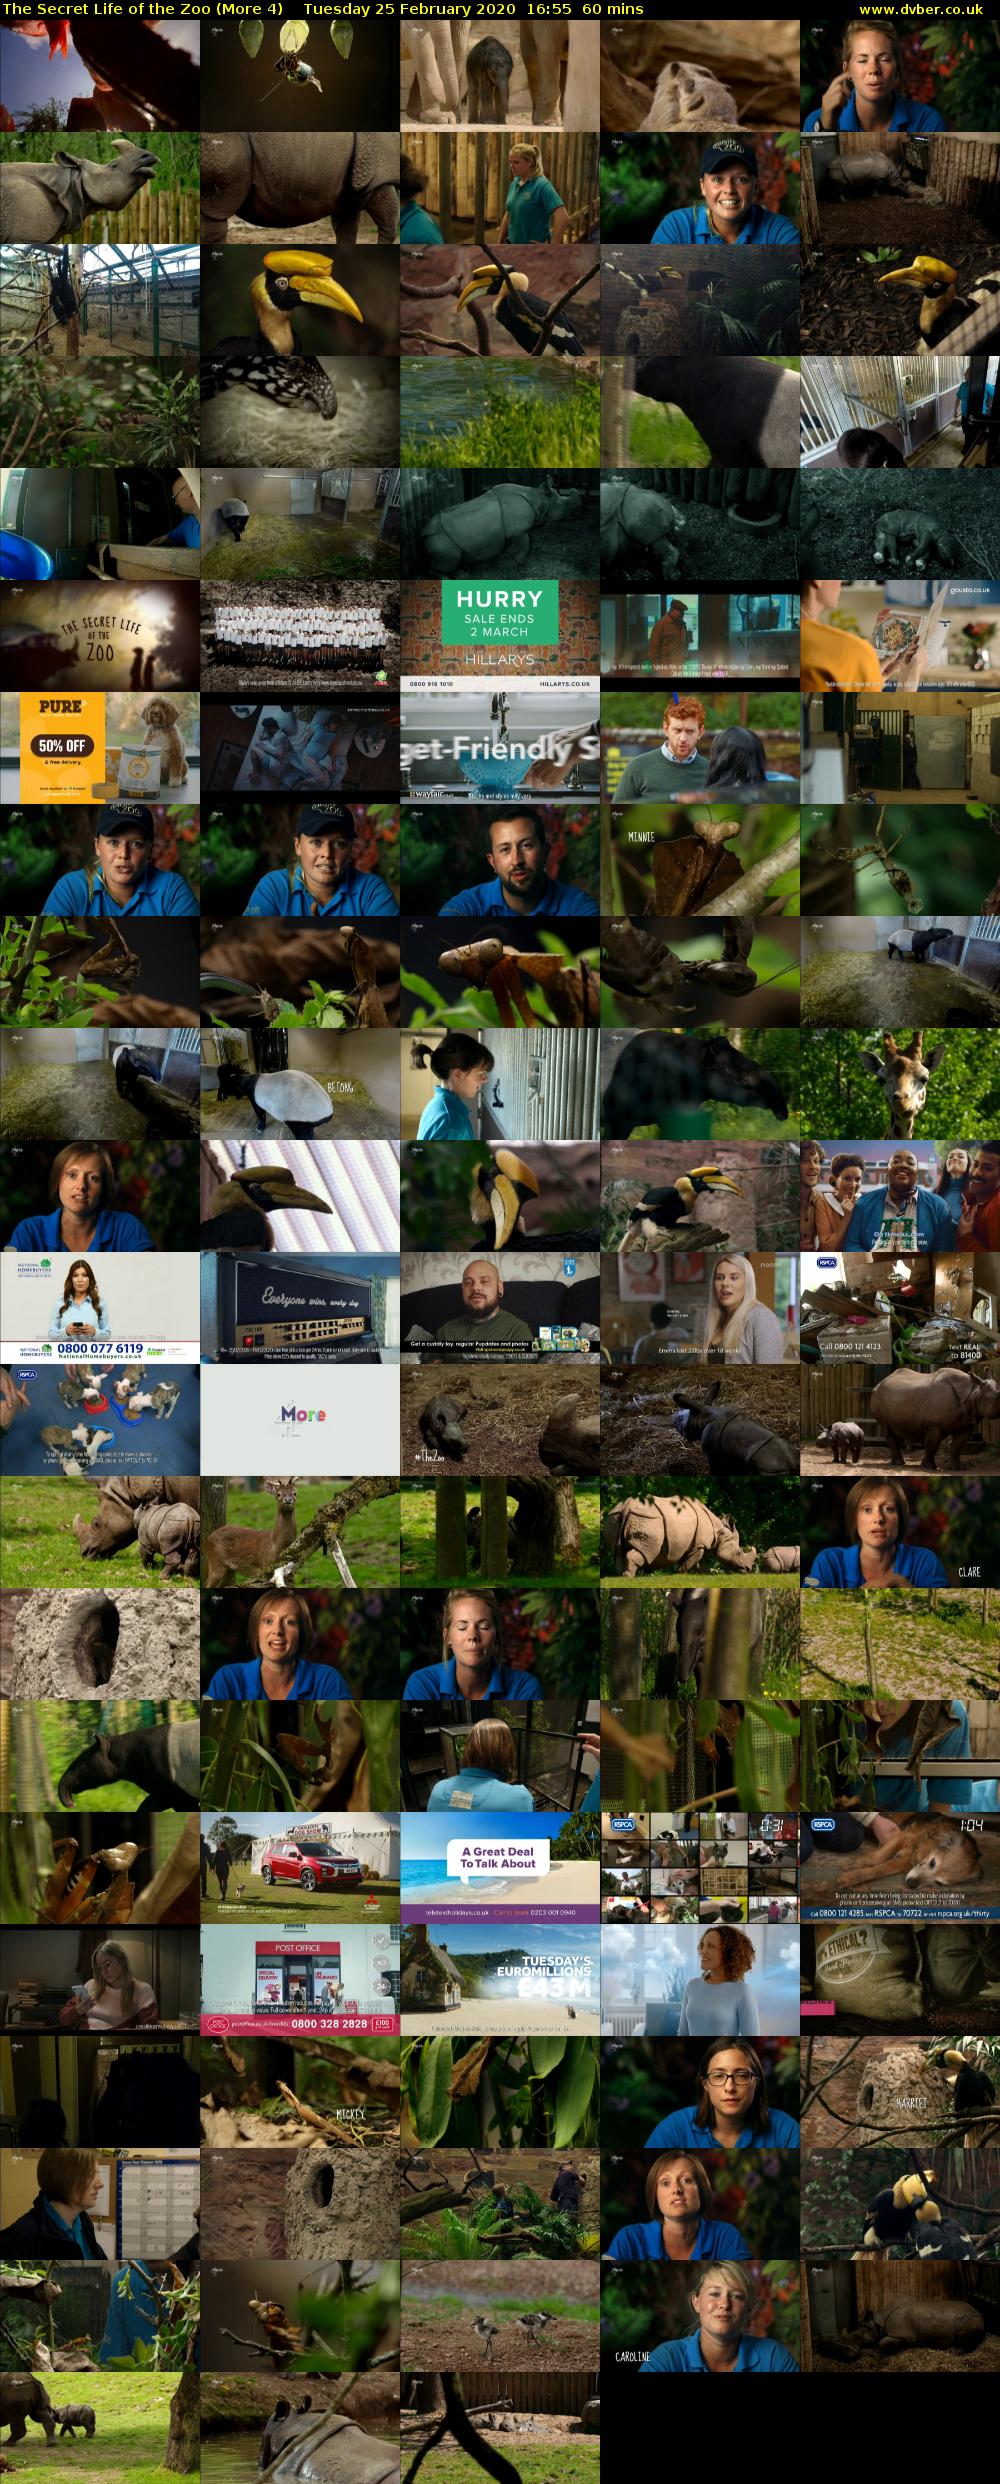 The Secret Life of the Zoo (More 4) Tuesday 25 February 2020 16:55 - 17:55